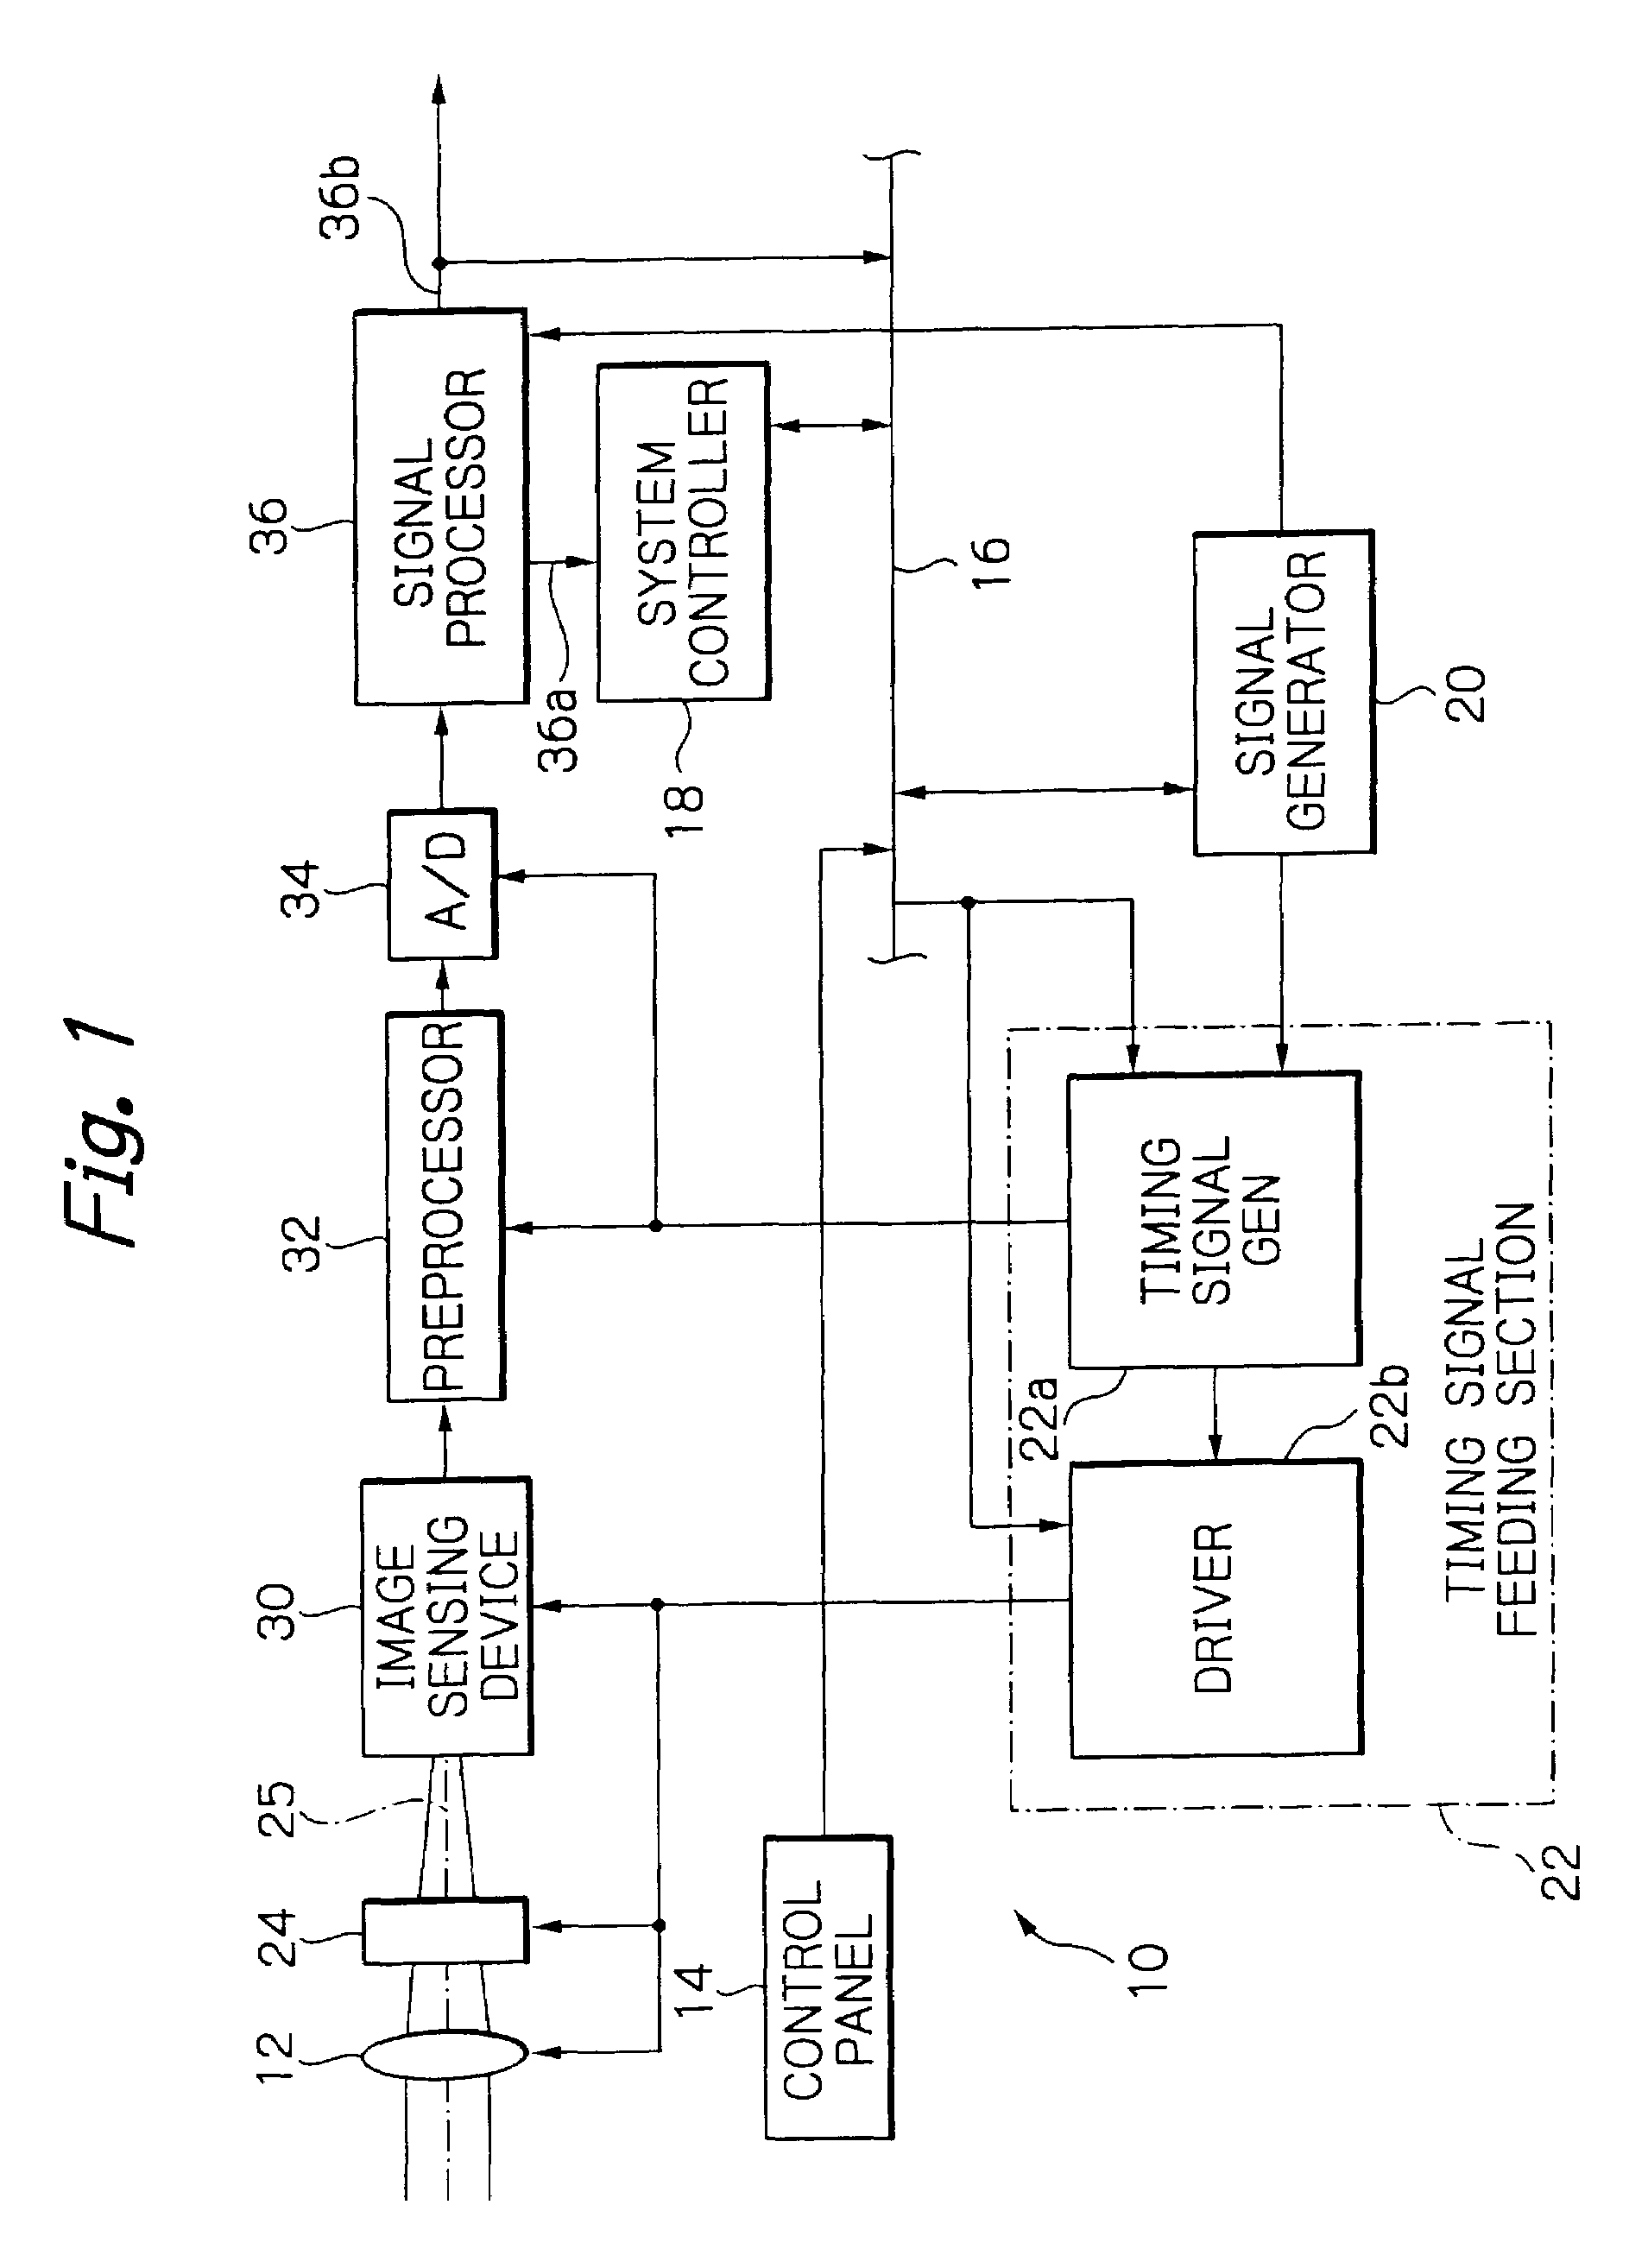 Solid-state imaging apparatus for controlling a sweep transfer period in dependence upon the amount of unnecessary charges to be swept out